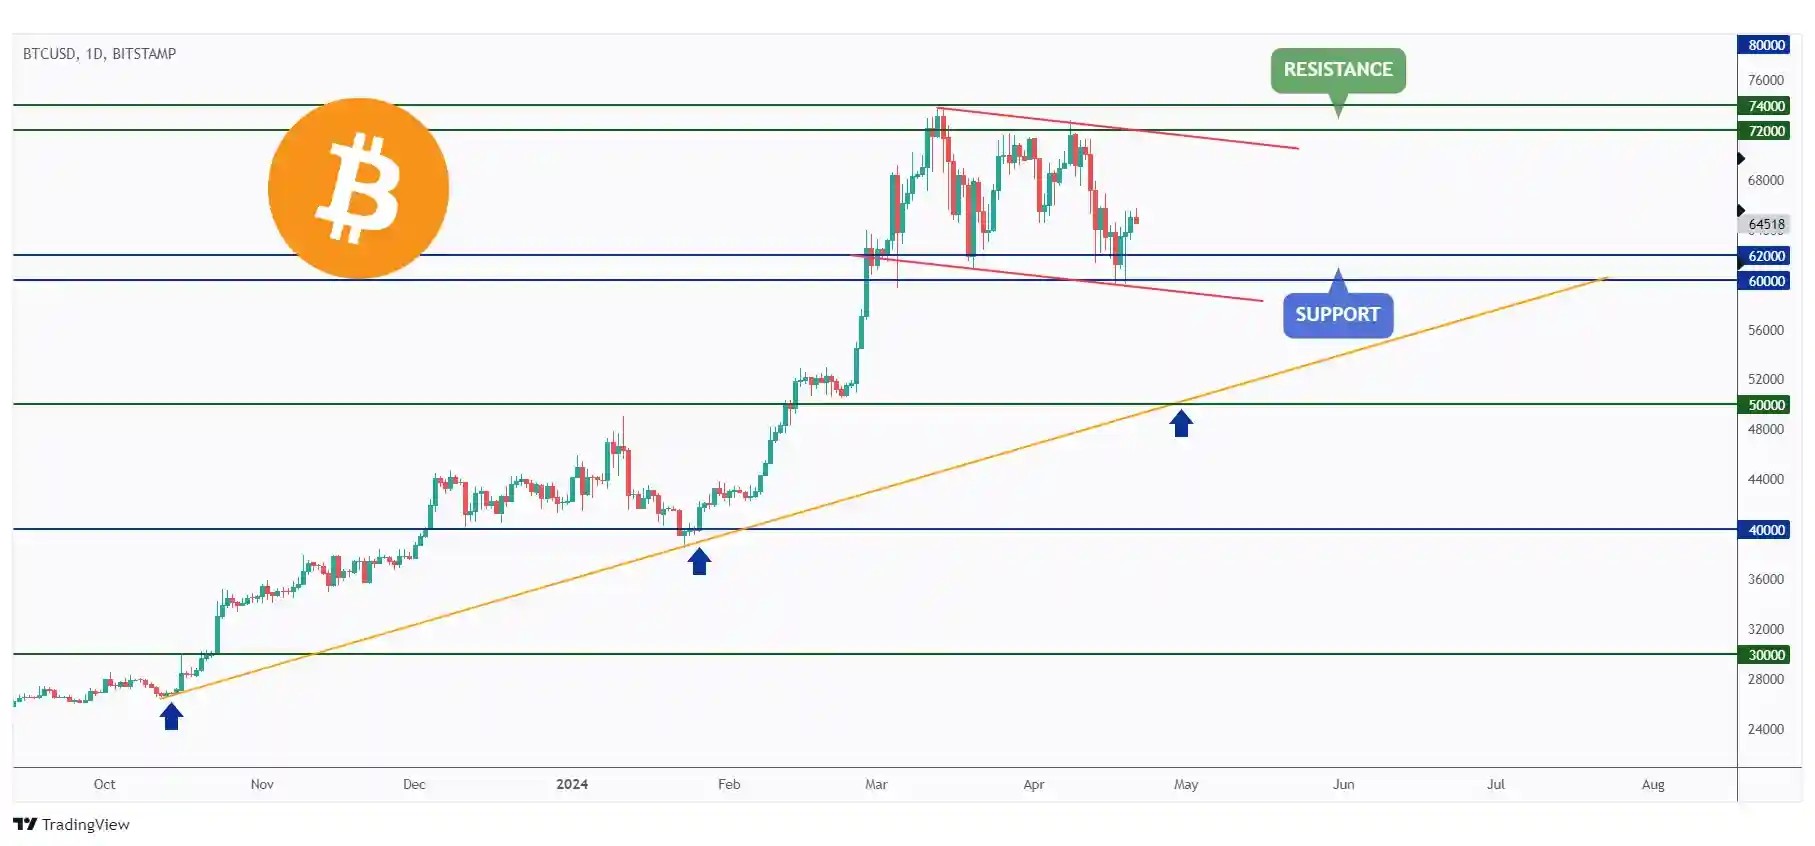 BTC daily chart rejecting a strong support at $60,000.